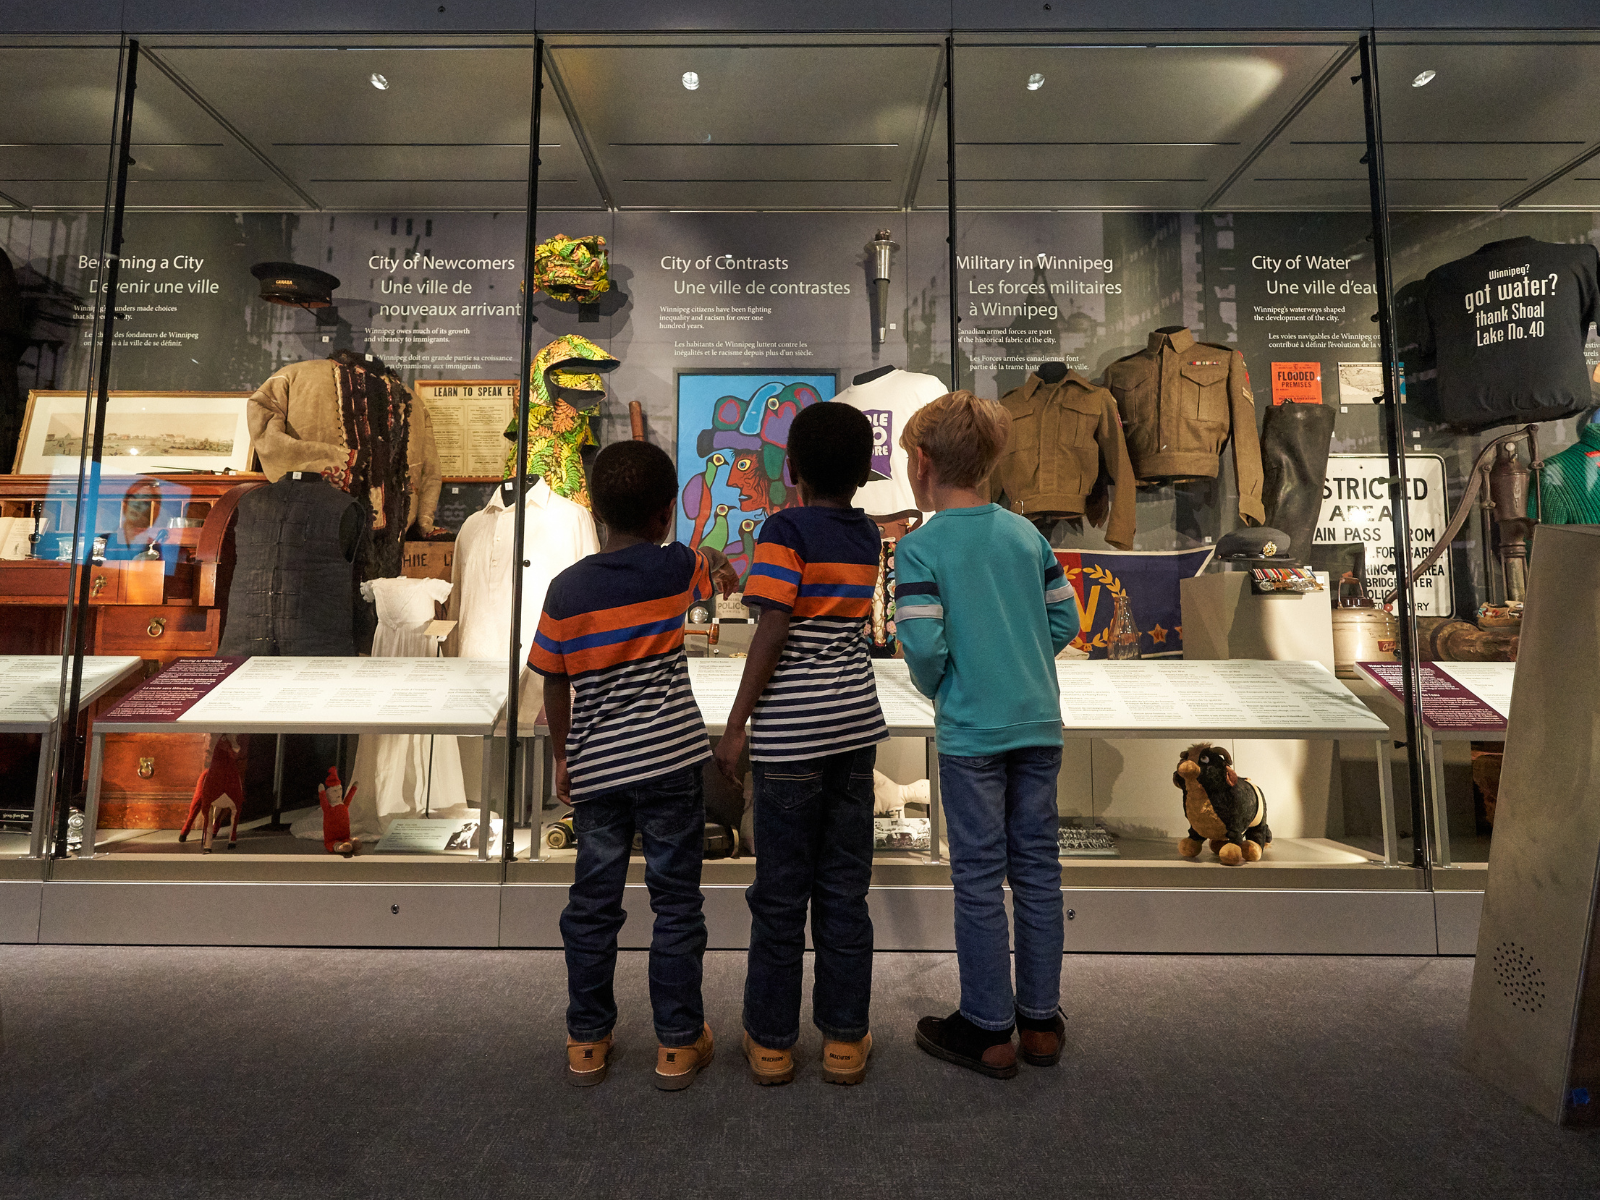 From behind, three children standing together looking into a wall of display cases filled with artifacts.